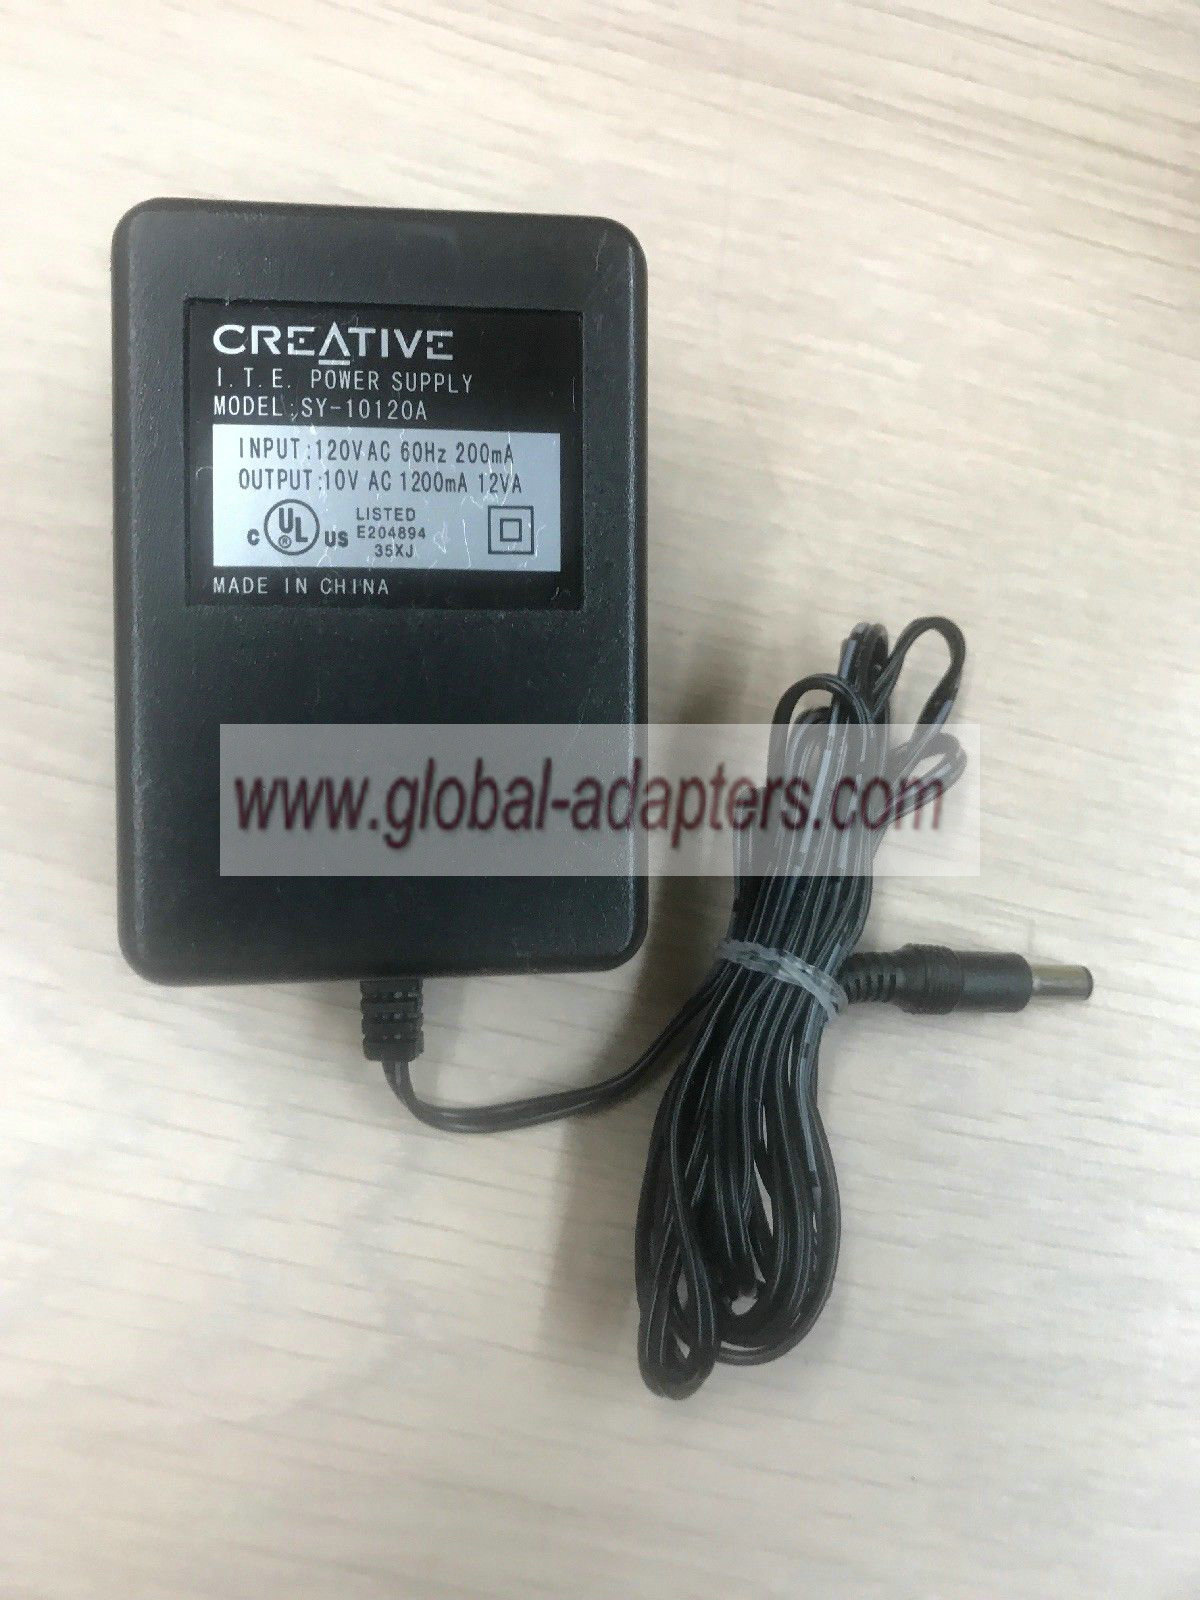 New AC/AC Adapter for Creative SY-10120A 10VAC 1200mA I.T.E Power Supply Adapter Charger